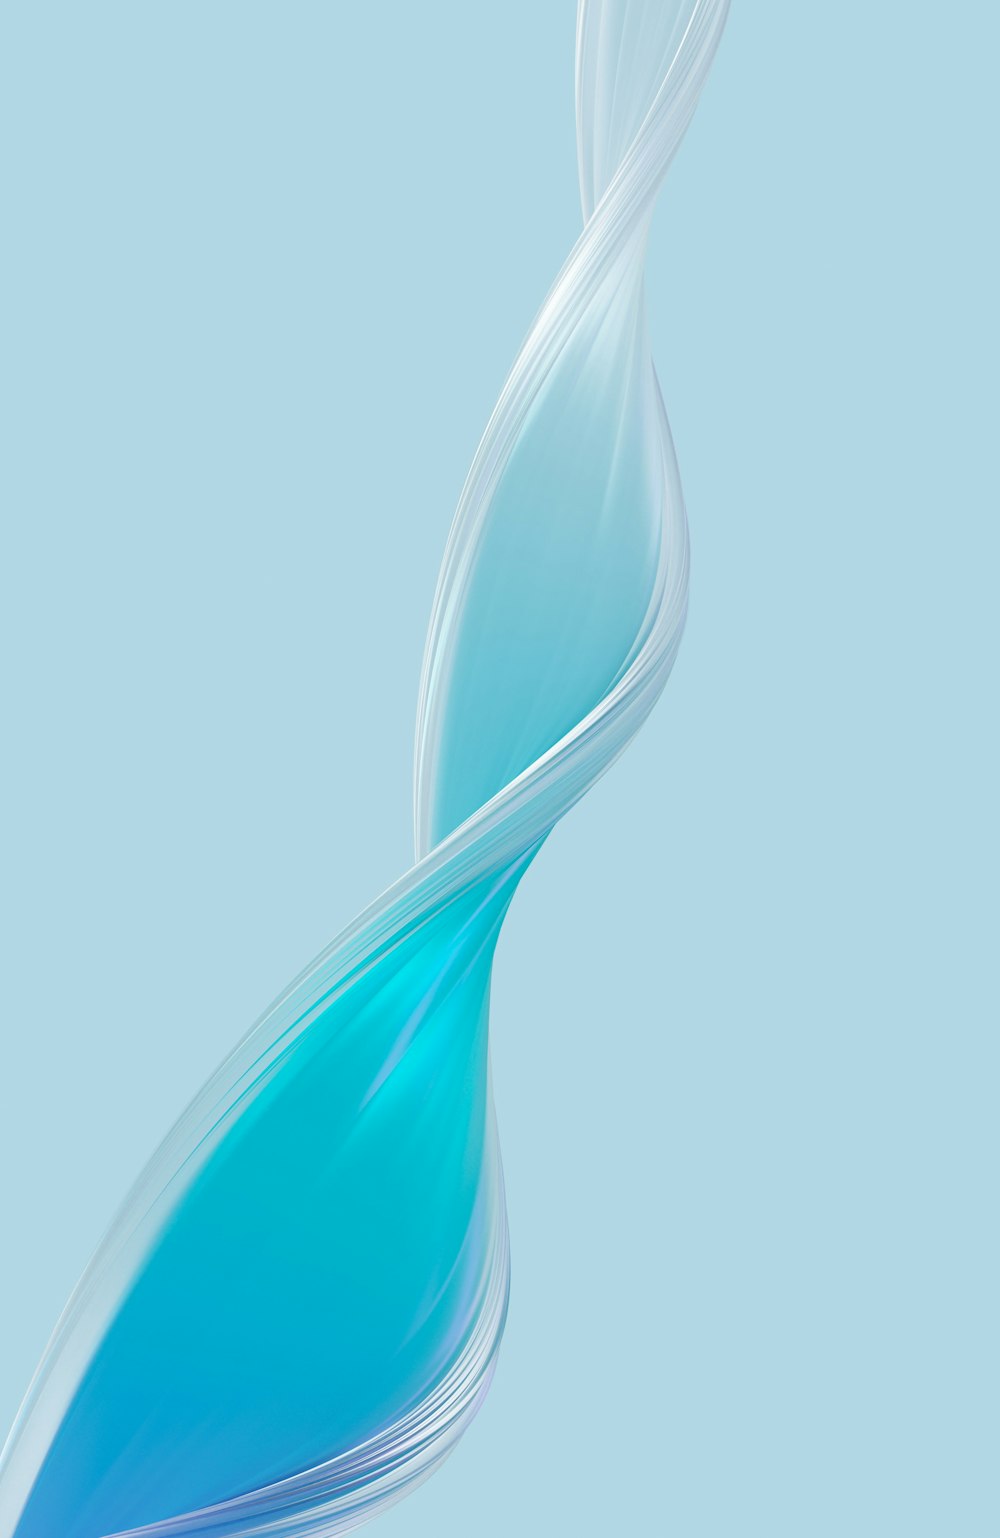 a blue and white swirl on a light blue background